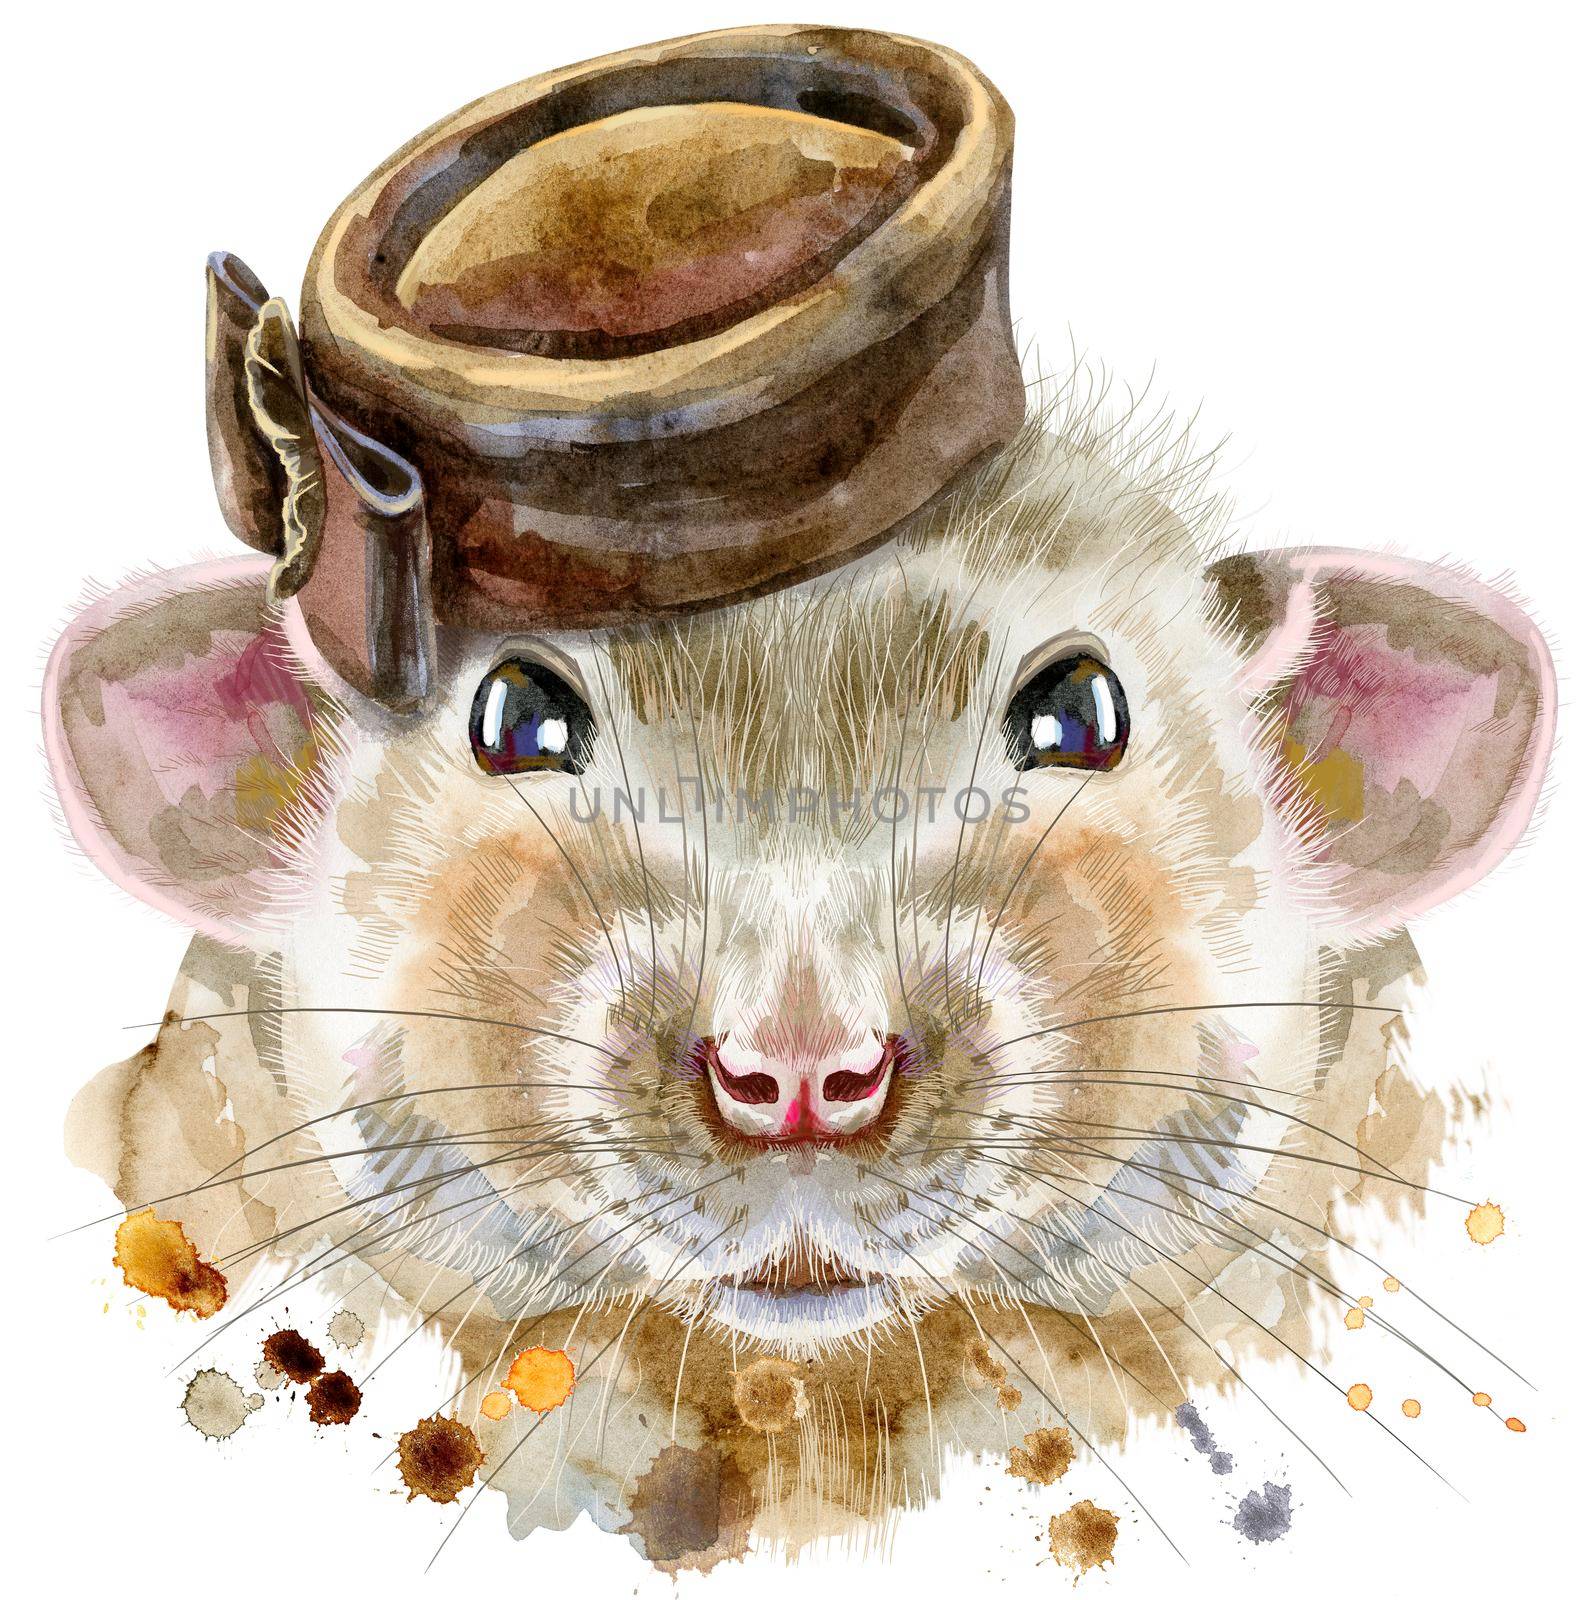 Cute rat with brown hat and for t-shirt graphics. Watercolor rat illustration